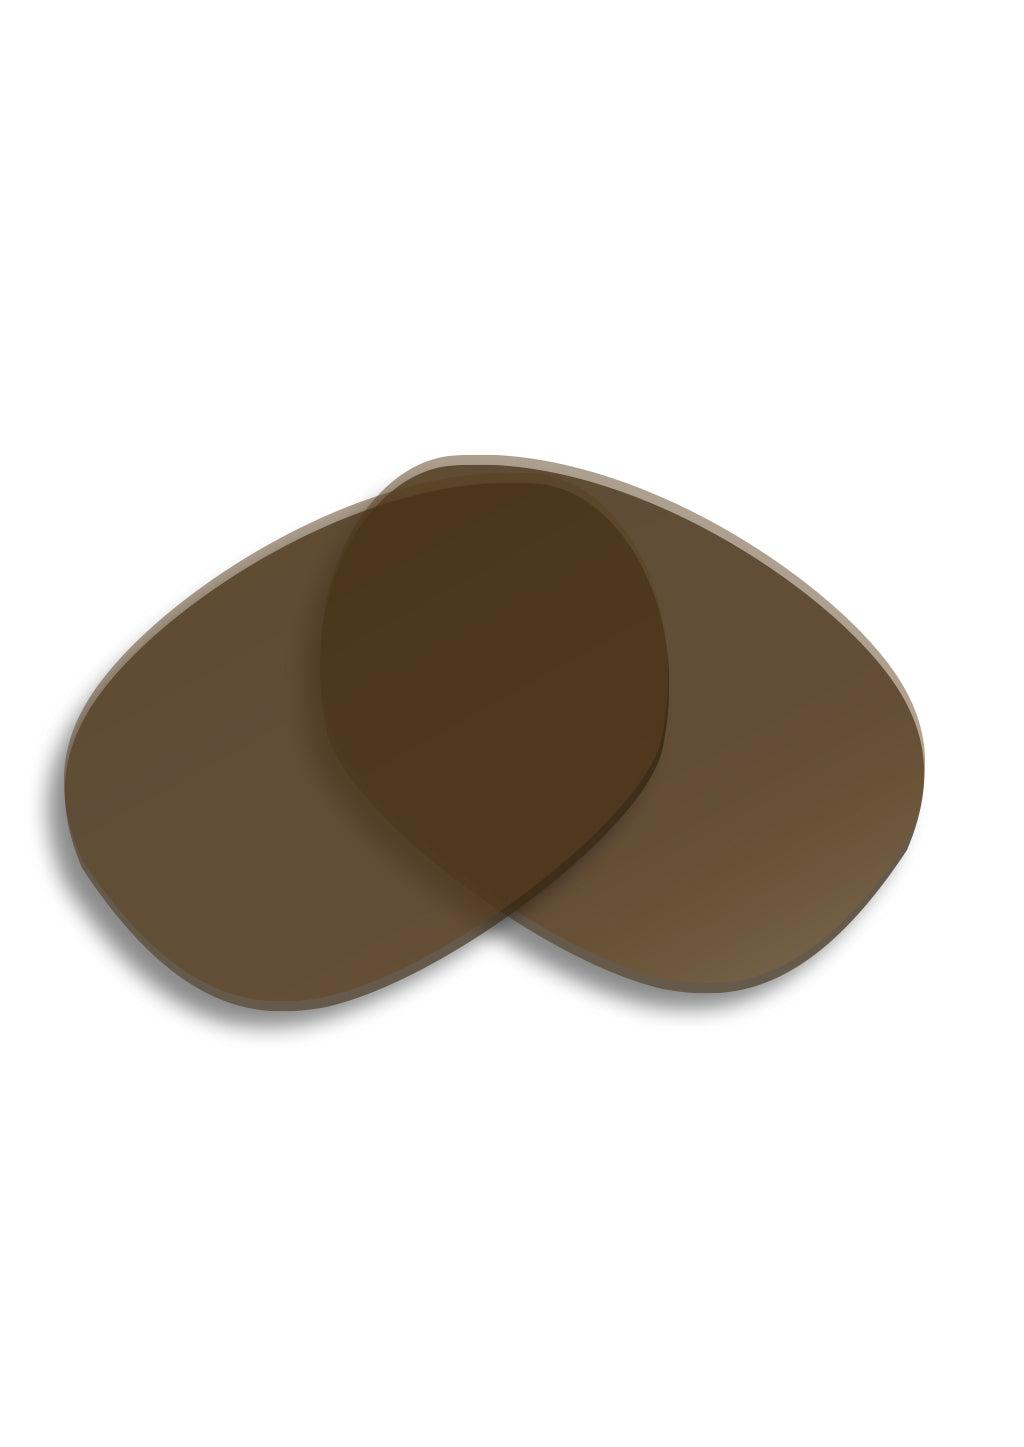 Extra lenses for Titan V2 sunglasses. This is solid brown.